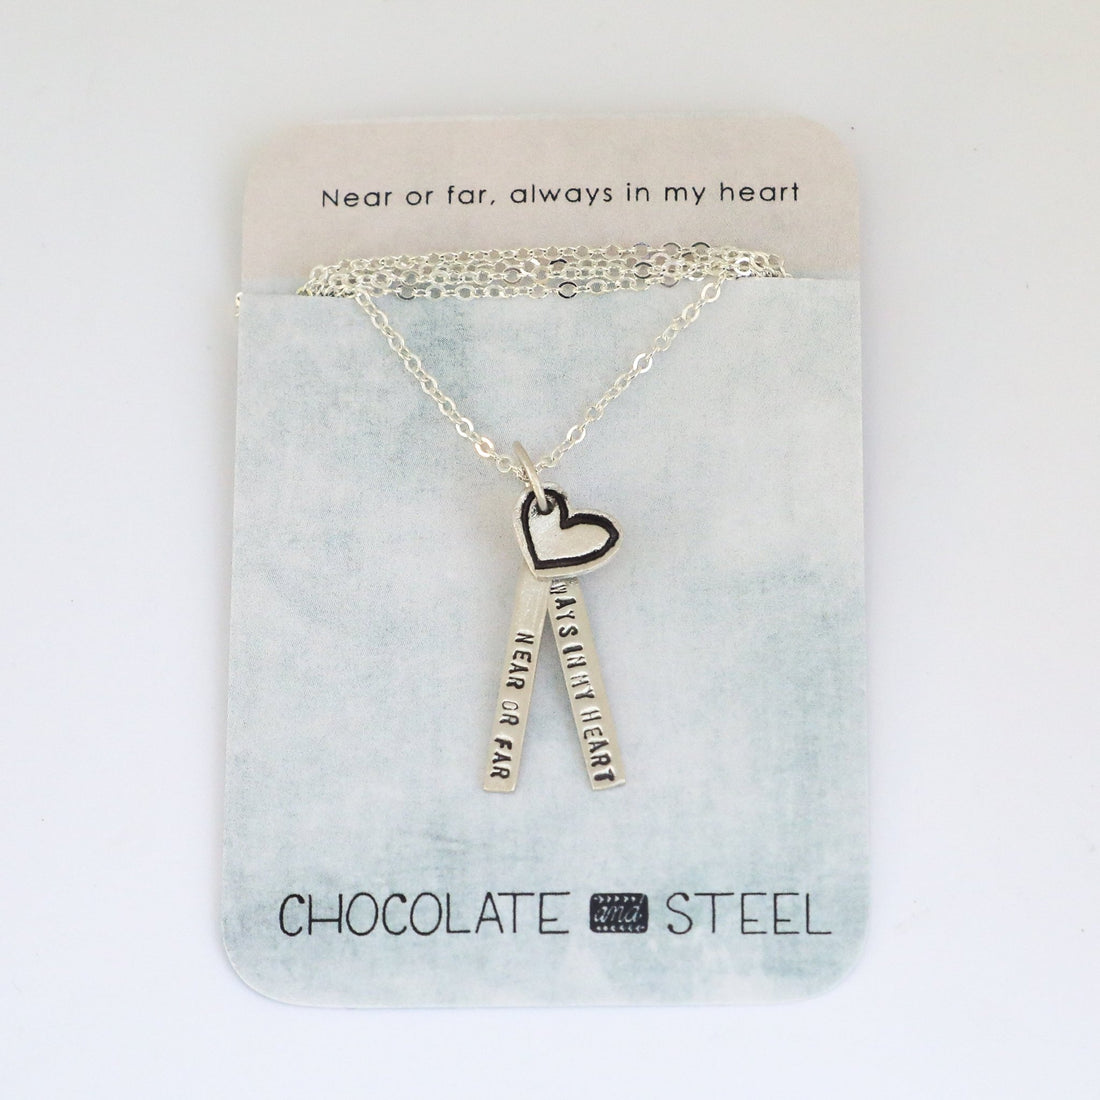 "Near or Far Always in My Heart" Quote Necklace - Chocolate and Steel